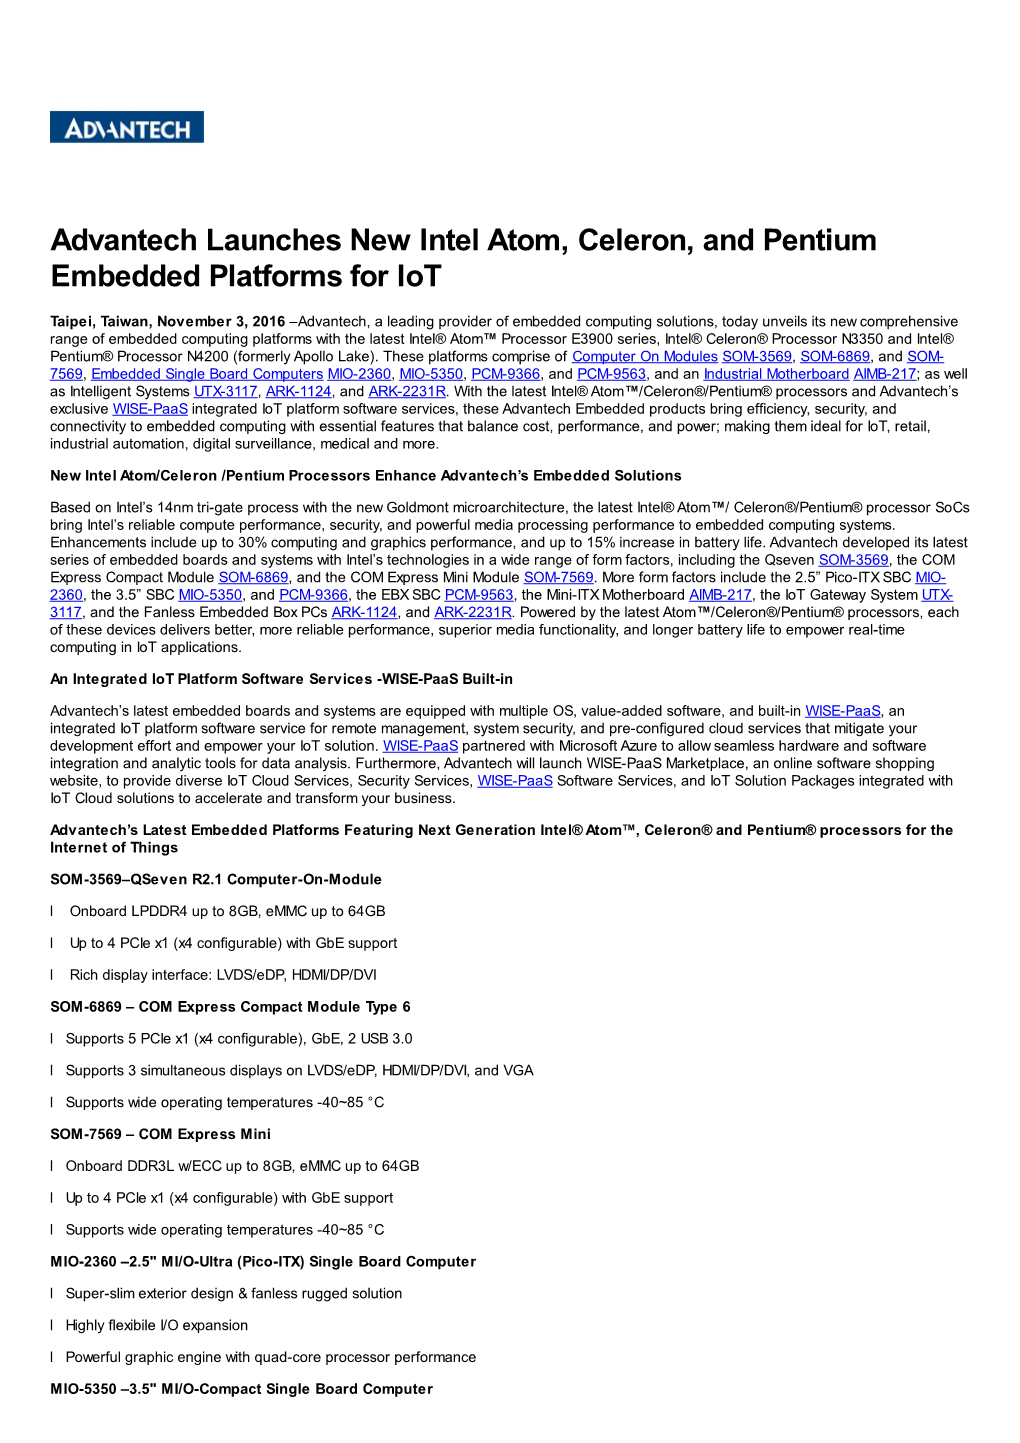 Advantech Launches New Intel Atom, Celeron, and Pentium Embedded Platforms for Iot